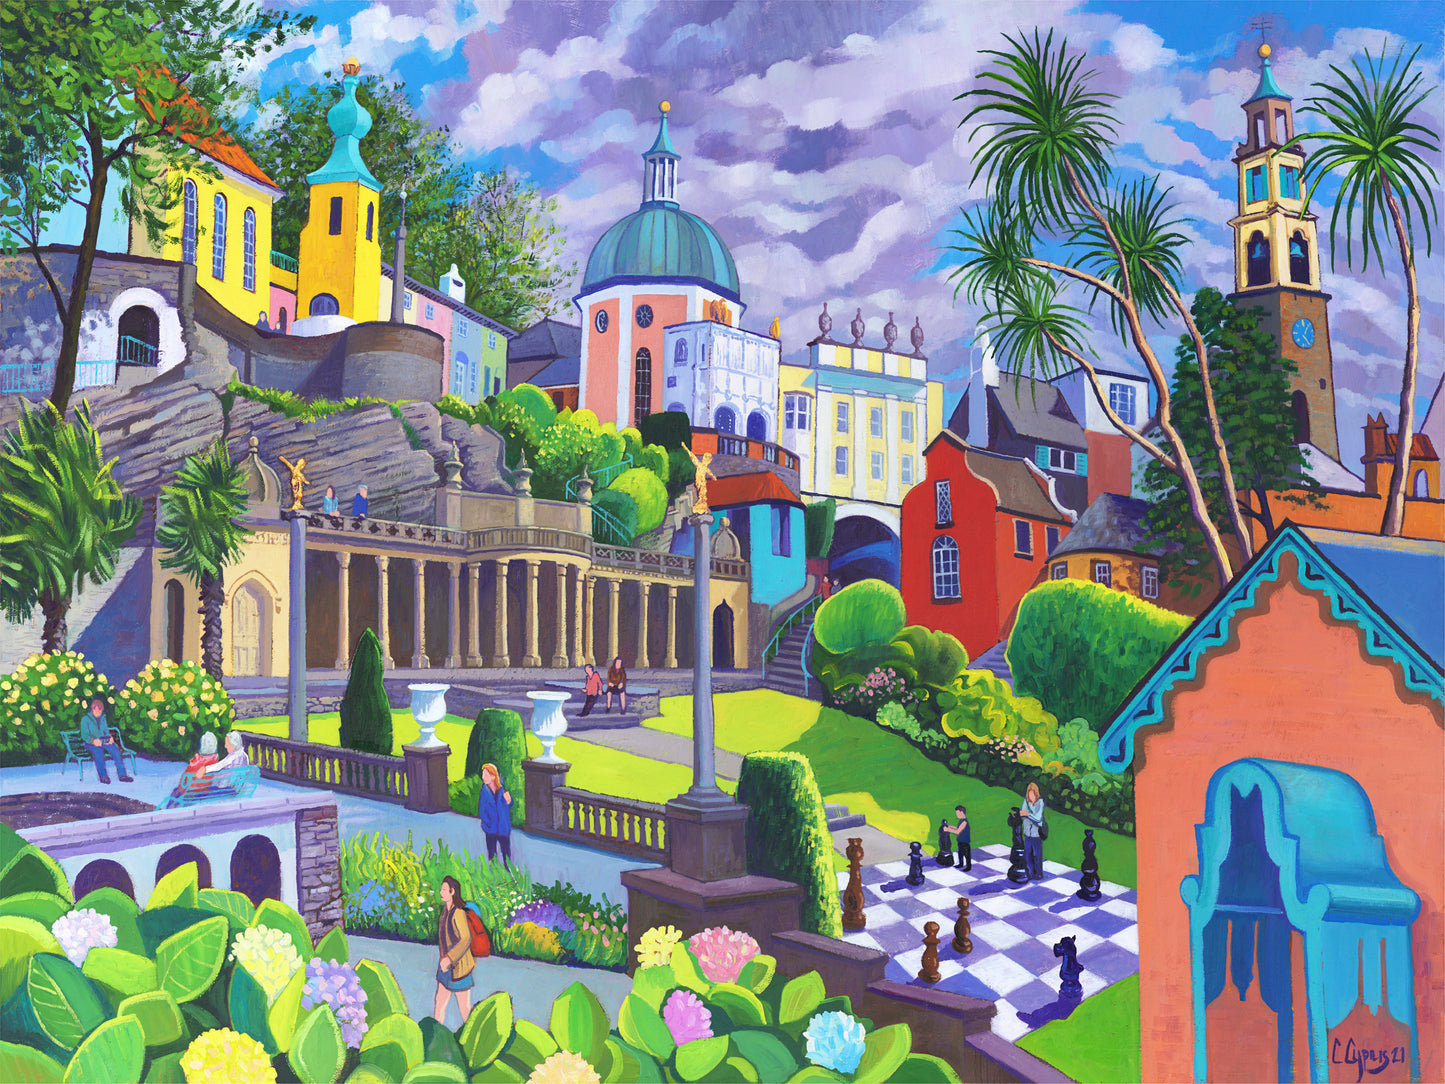 Piazza ~ Limited Edition Gicleé Print ~ Portmeirion Village Wales ~ by Chris Cyprus Artist